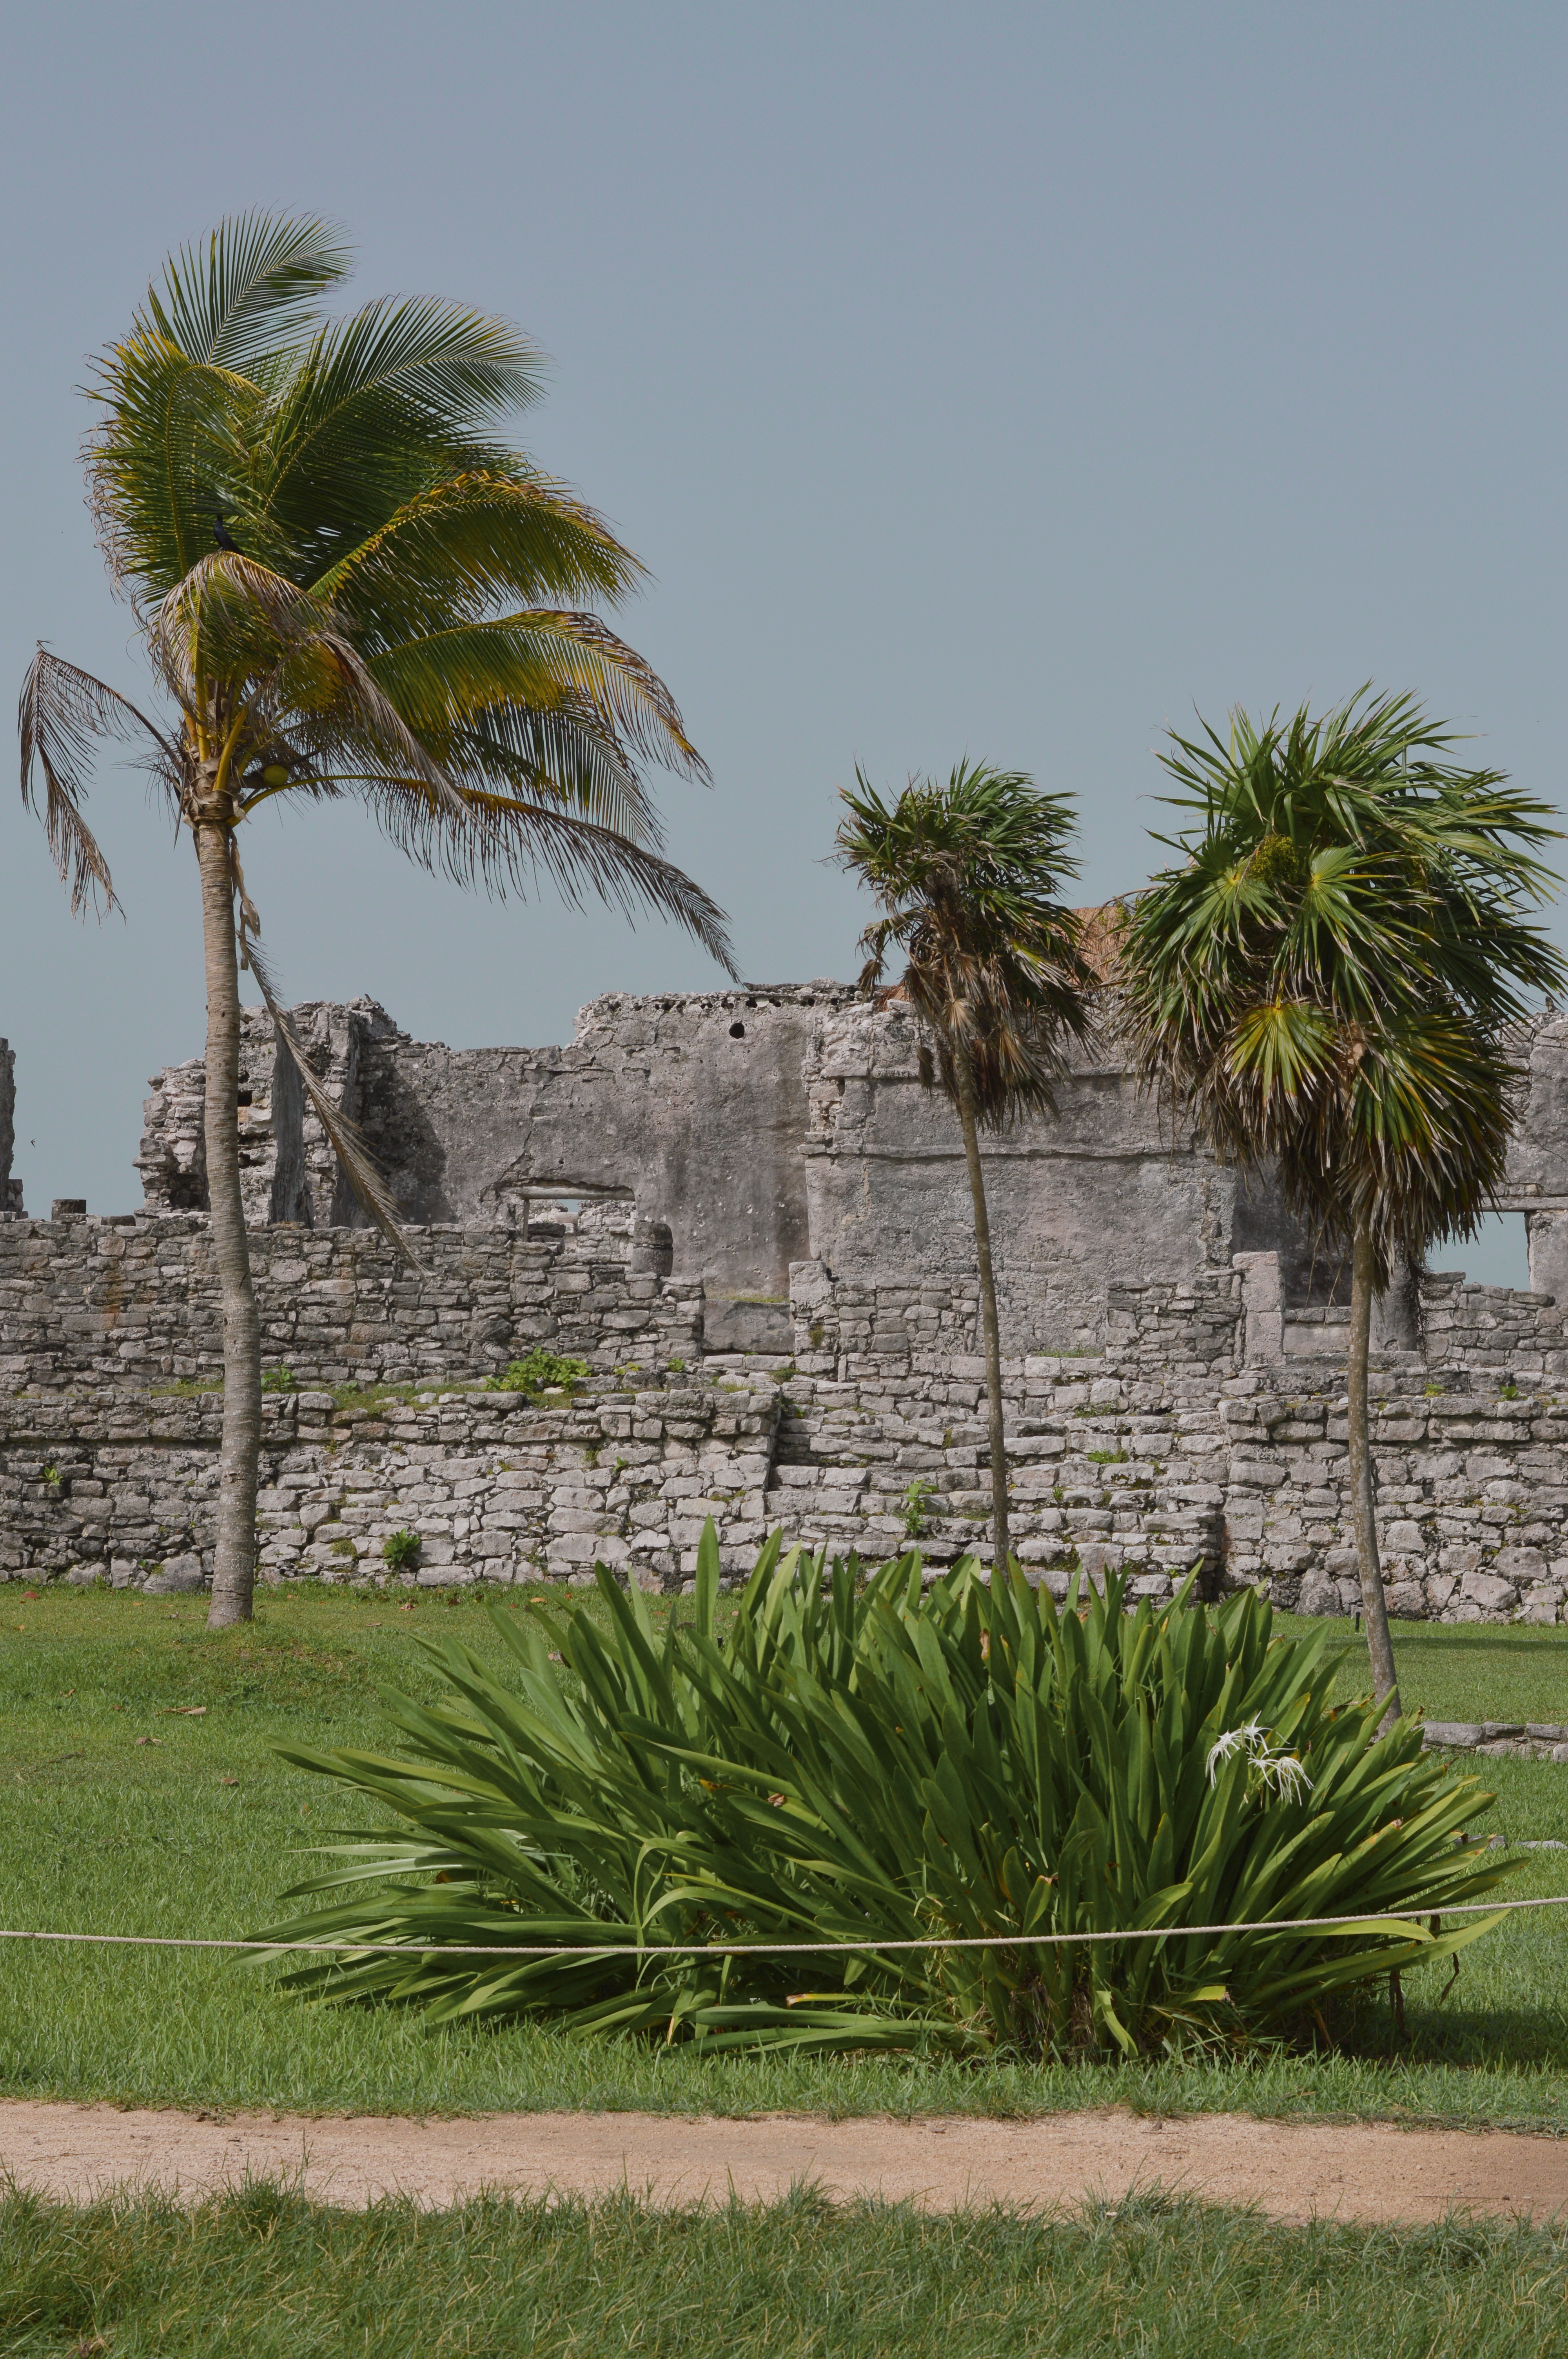 One of the remaining structures at the Tulum Ruins